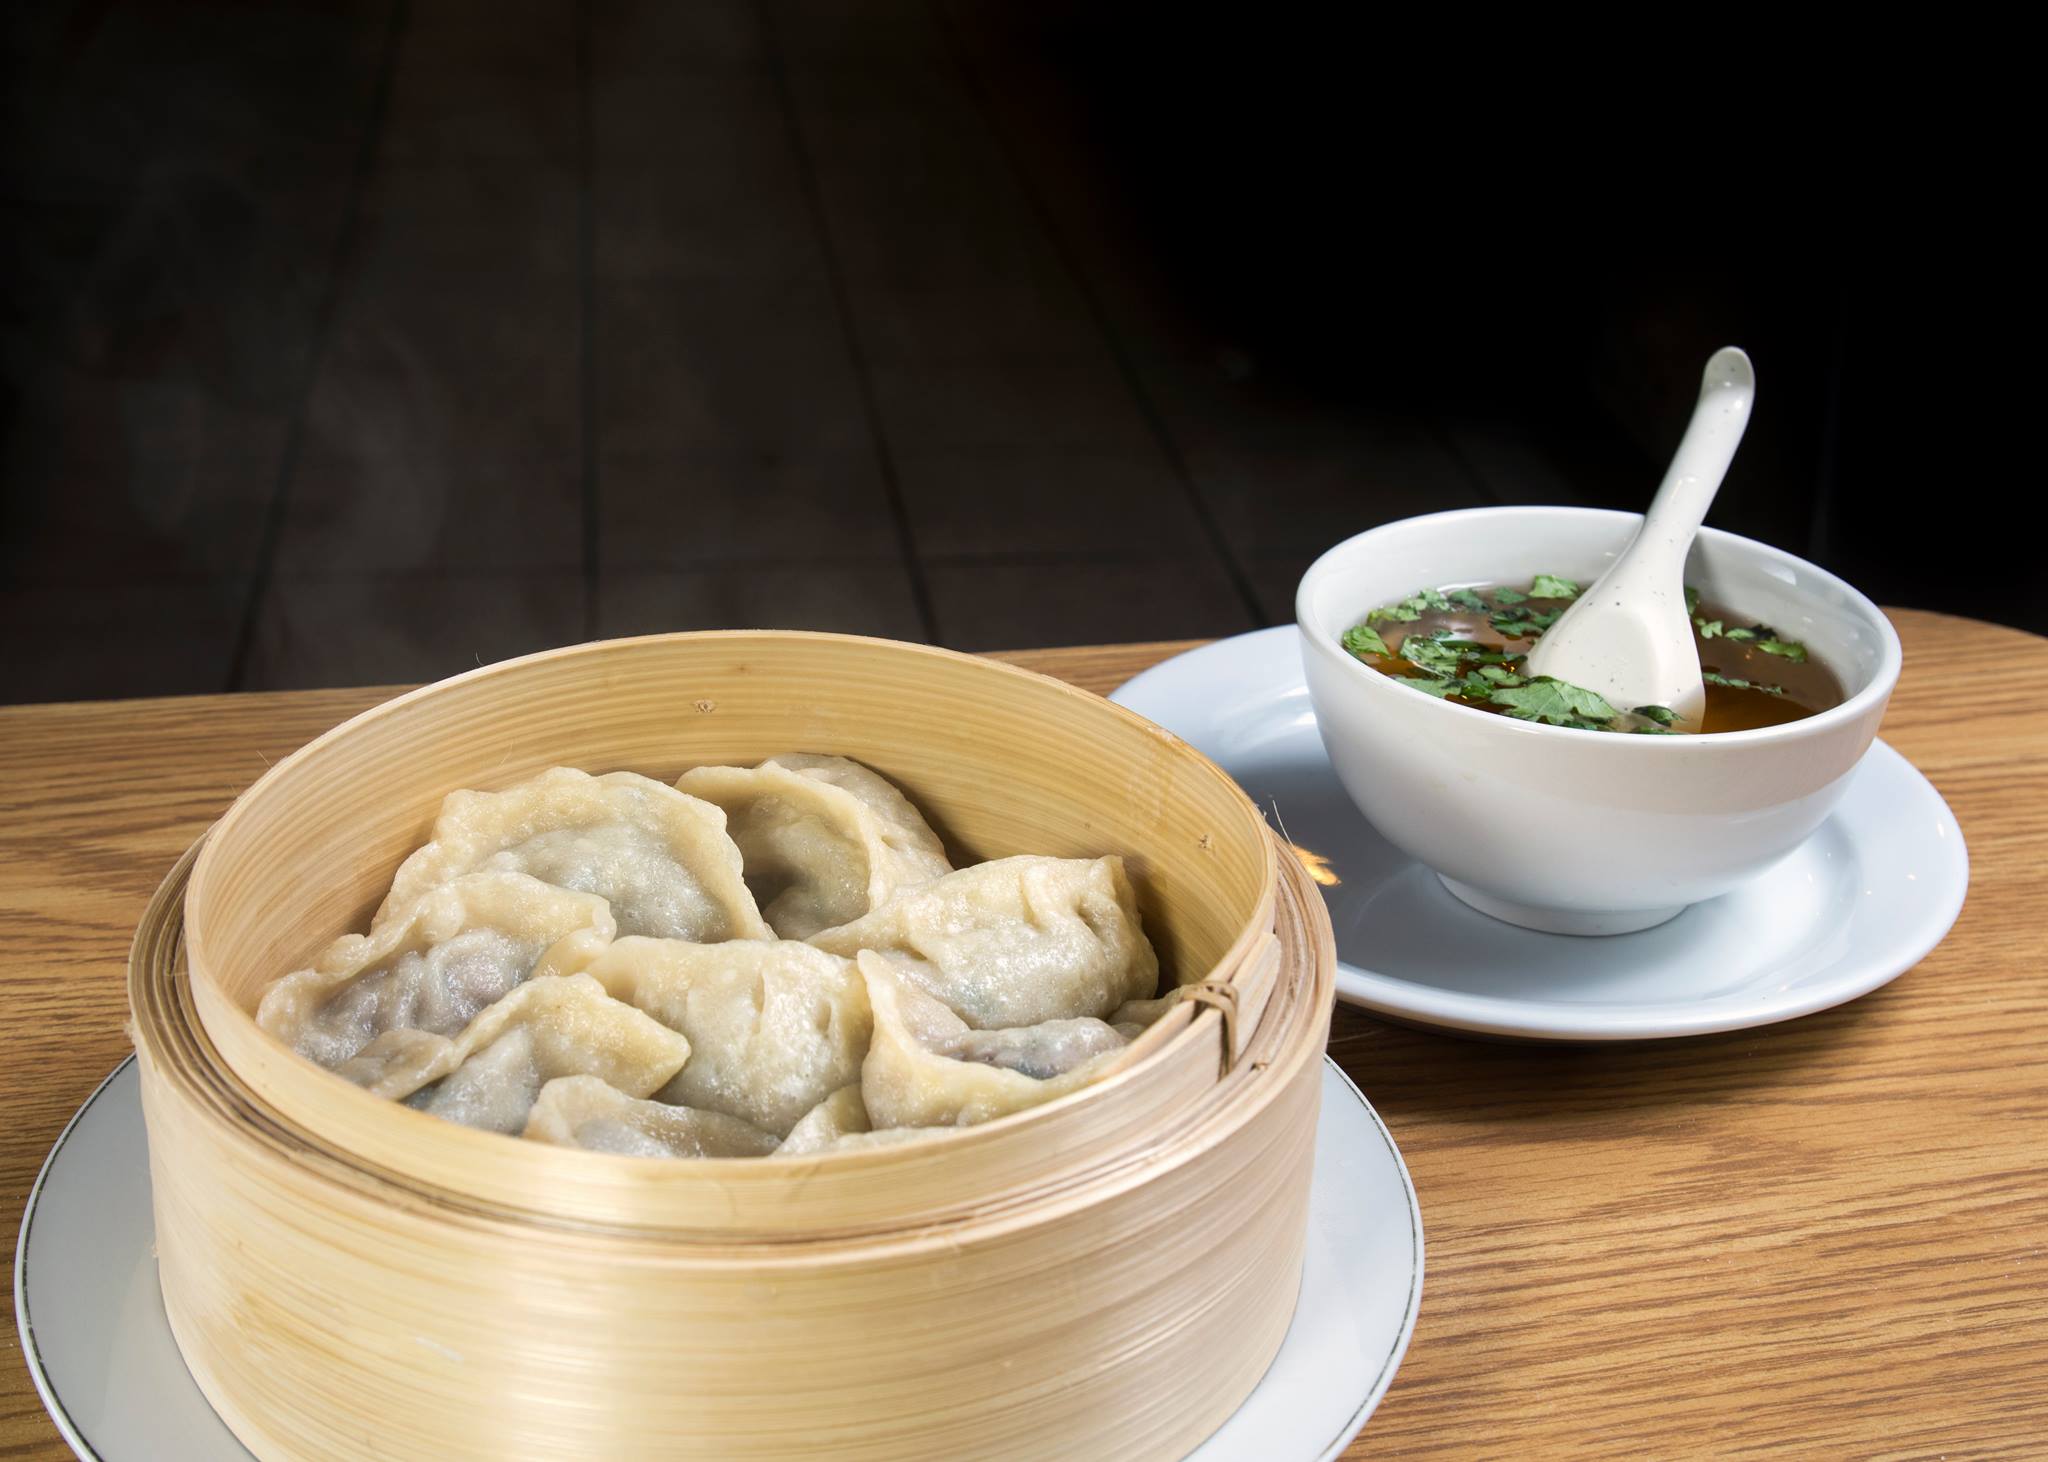 Momos and soup